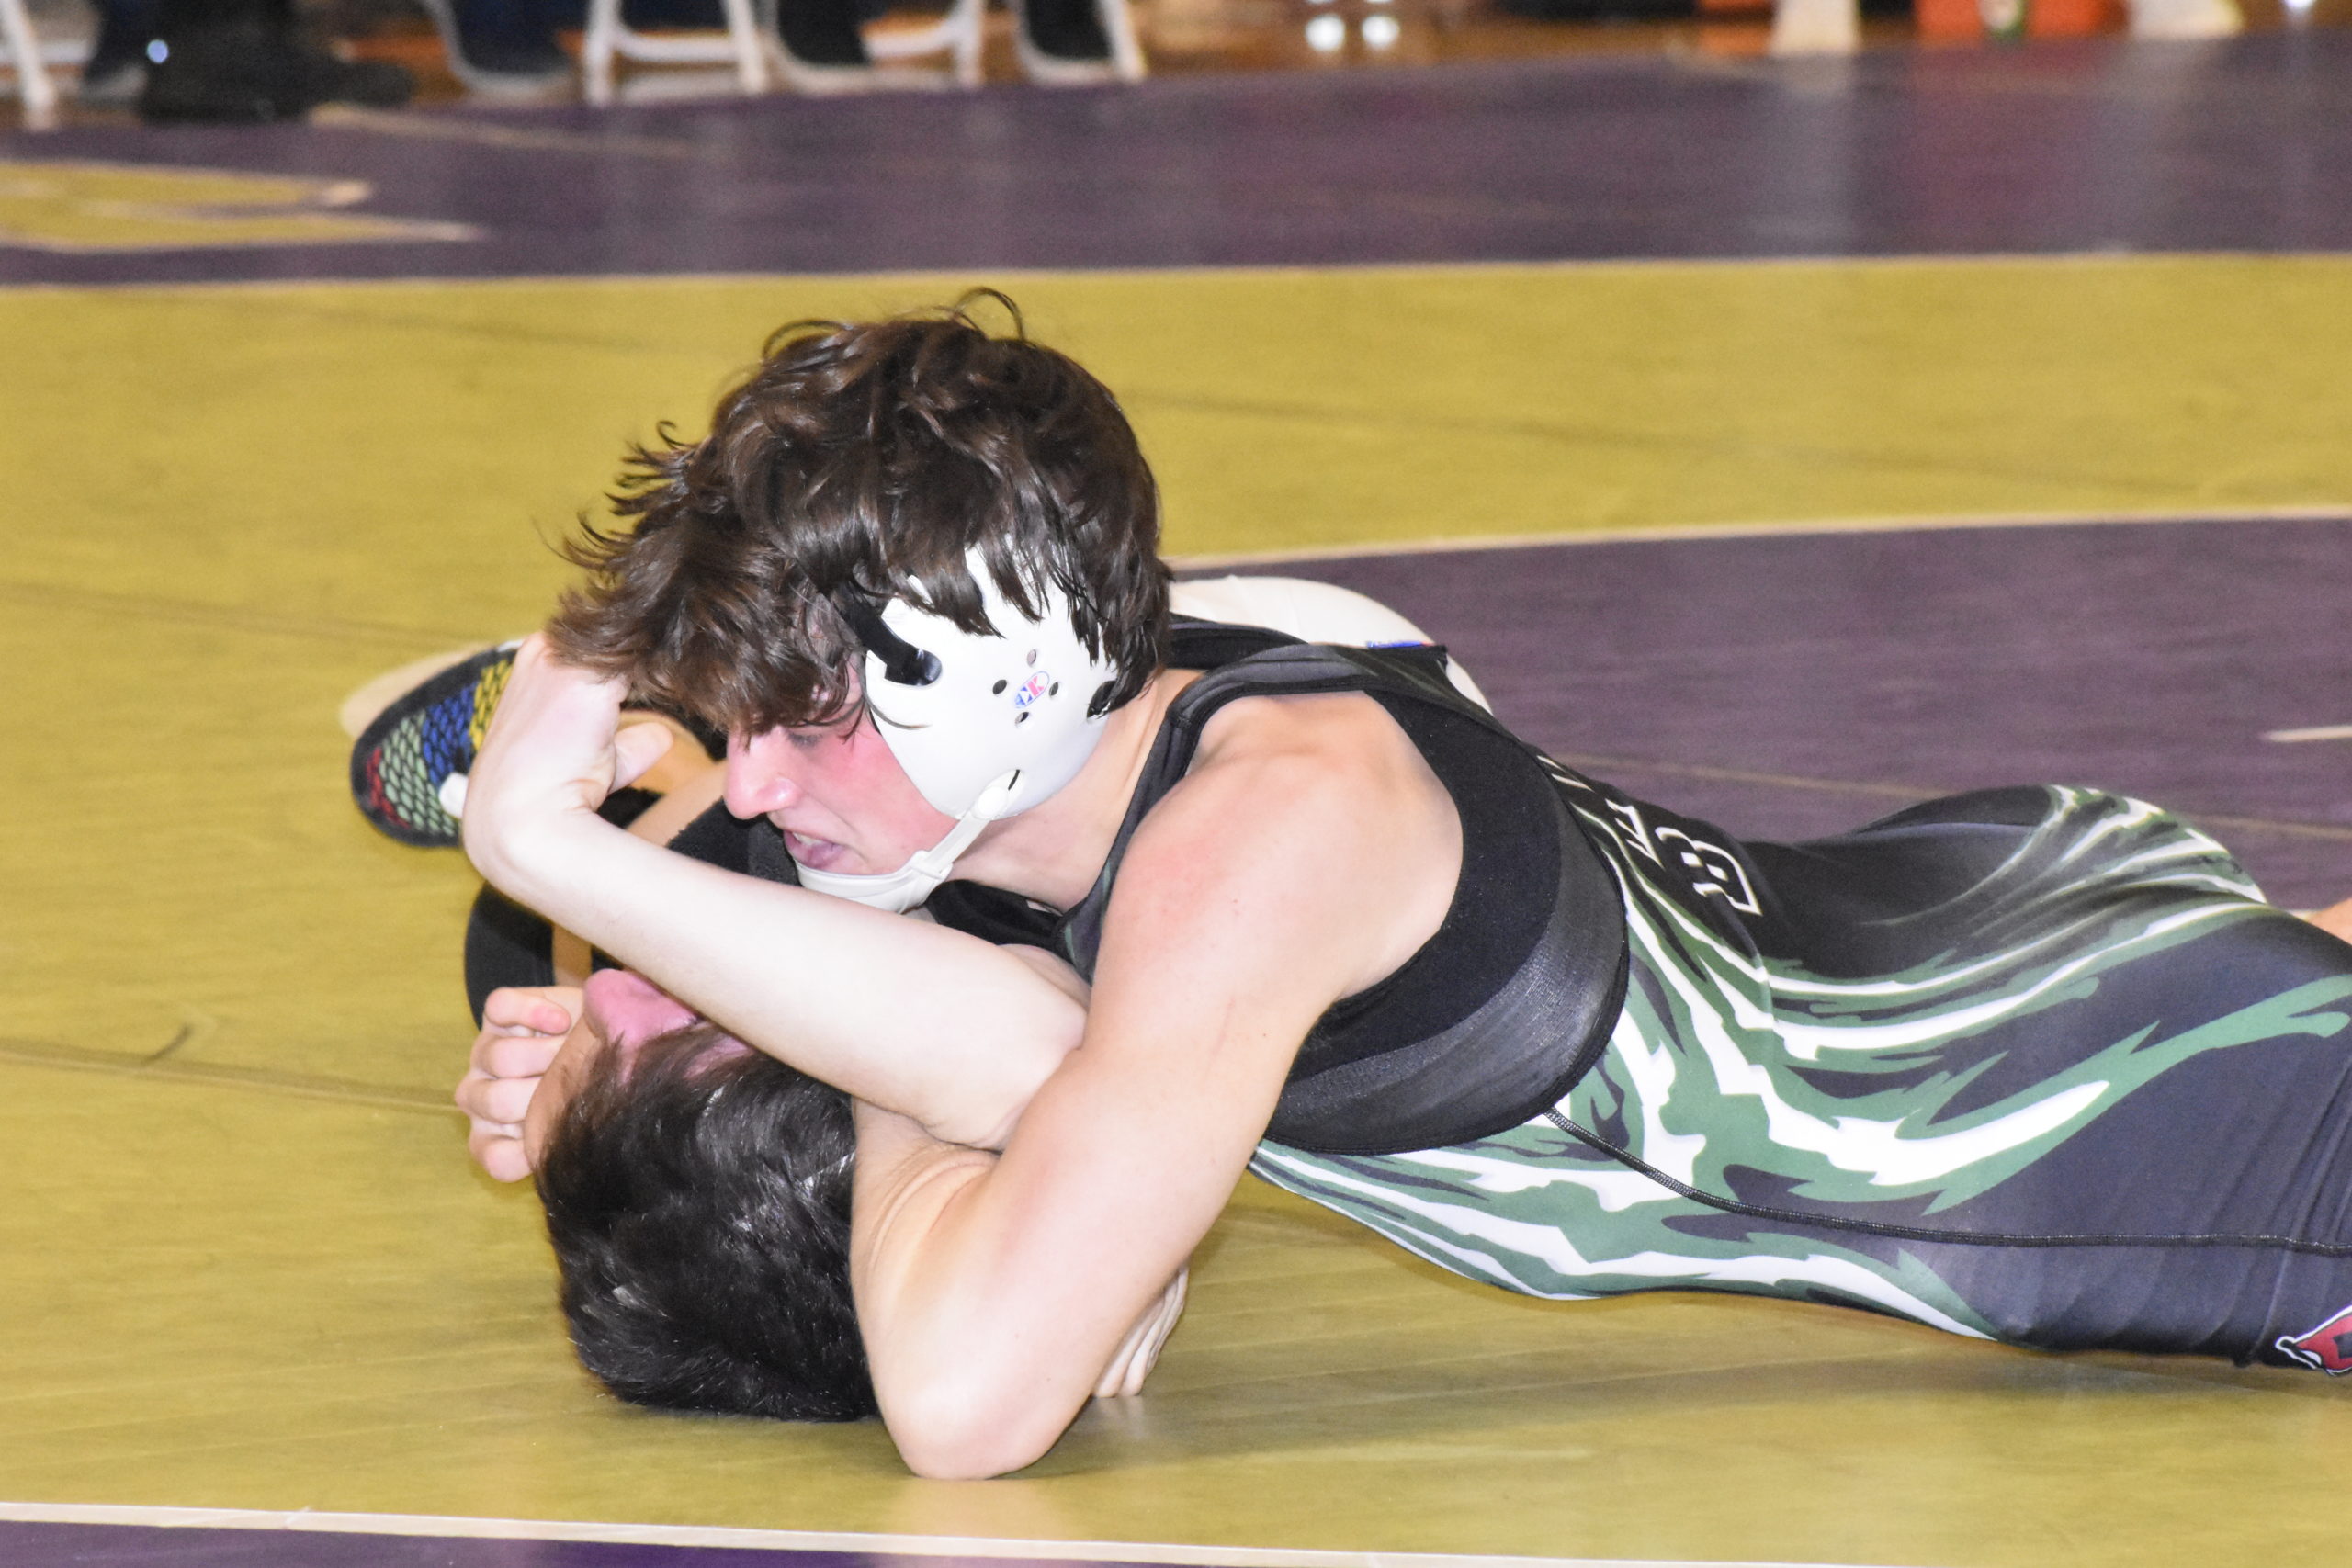 Westhampton Beach senior Jason Montagna flipped Thomas DiResta of Kings Park to his back and nearly pinned him in the first period of their finals match.